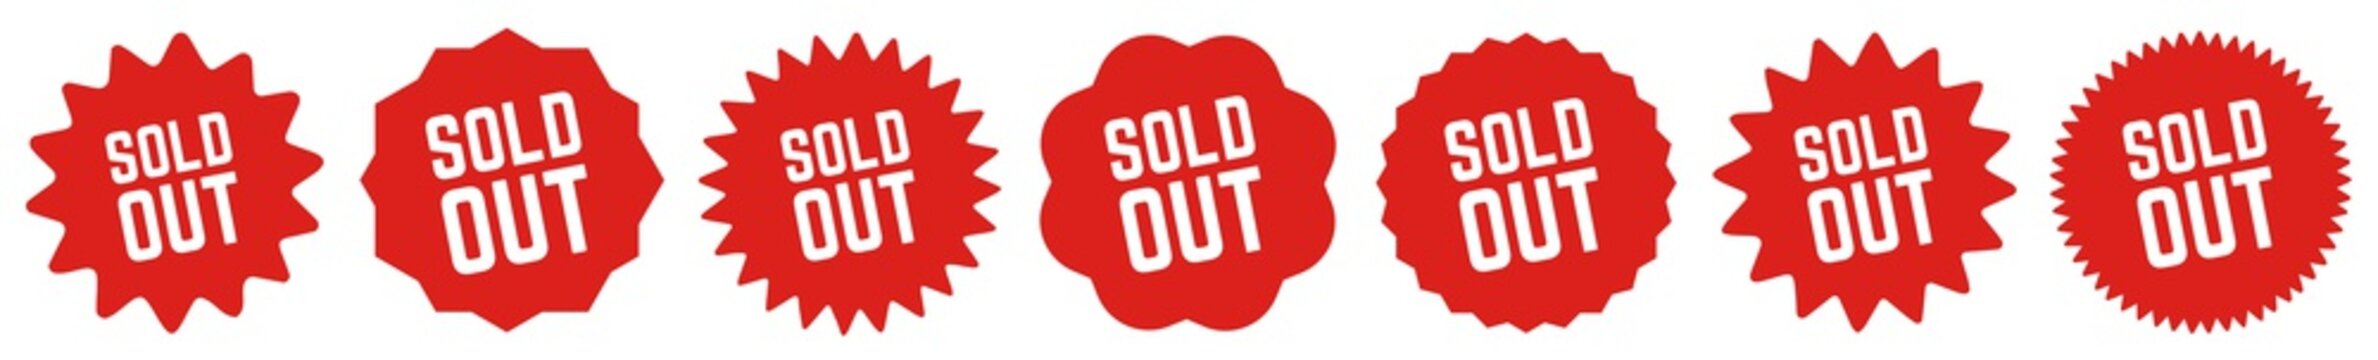 Sold Out Tag Red | Icon | Sticker | Deal Label | Variations